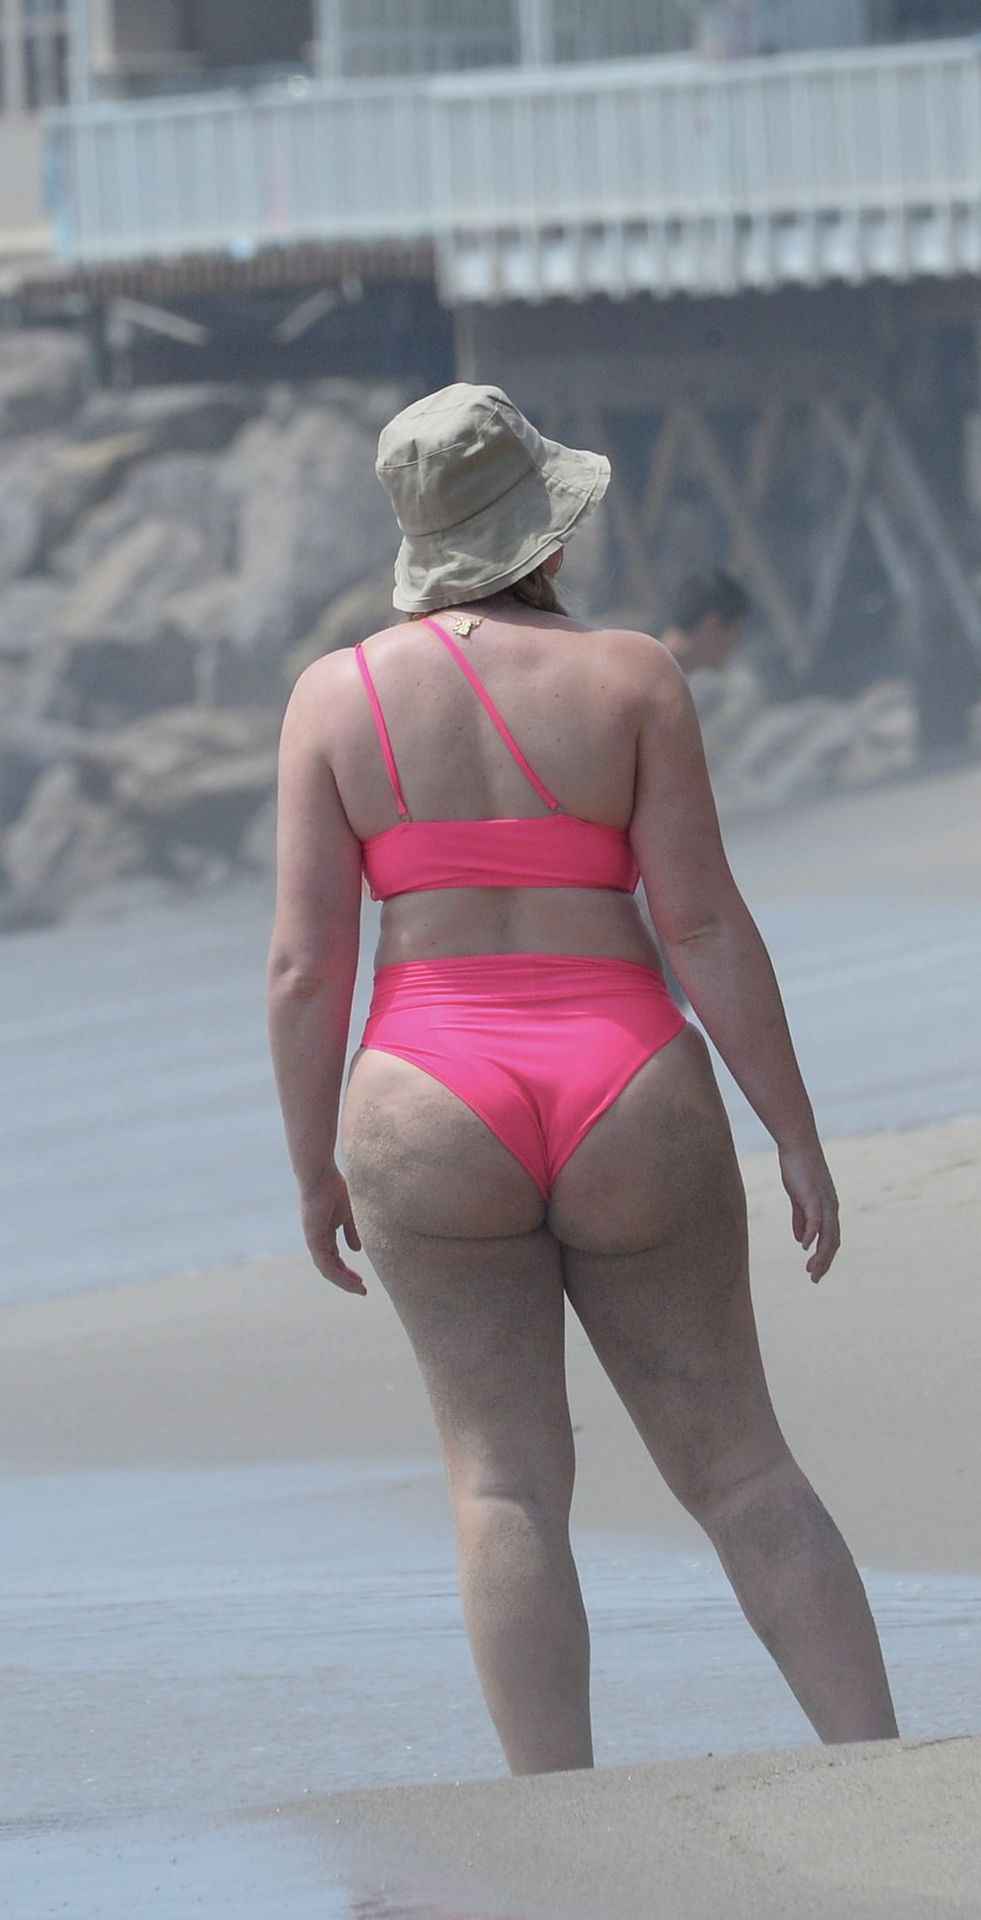 Unforgettable Iskra Lawrence Shows Her Meaty Ass and the Rest of Her Hot Body